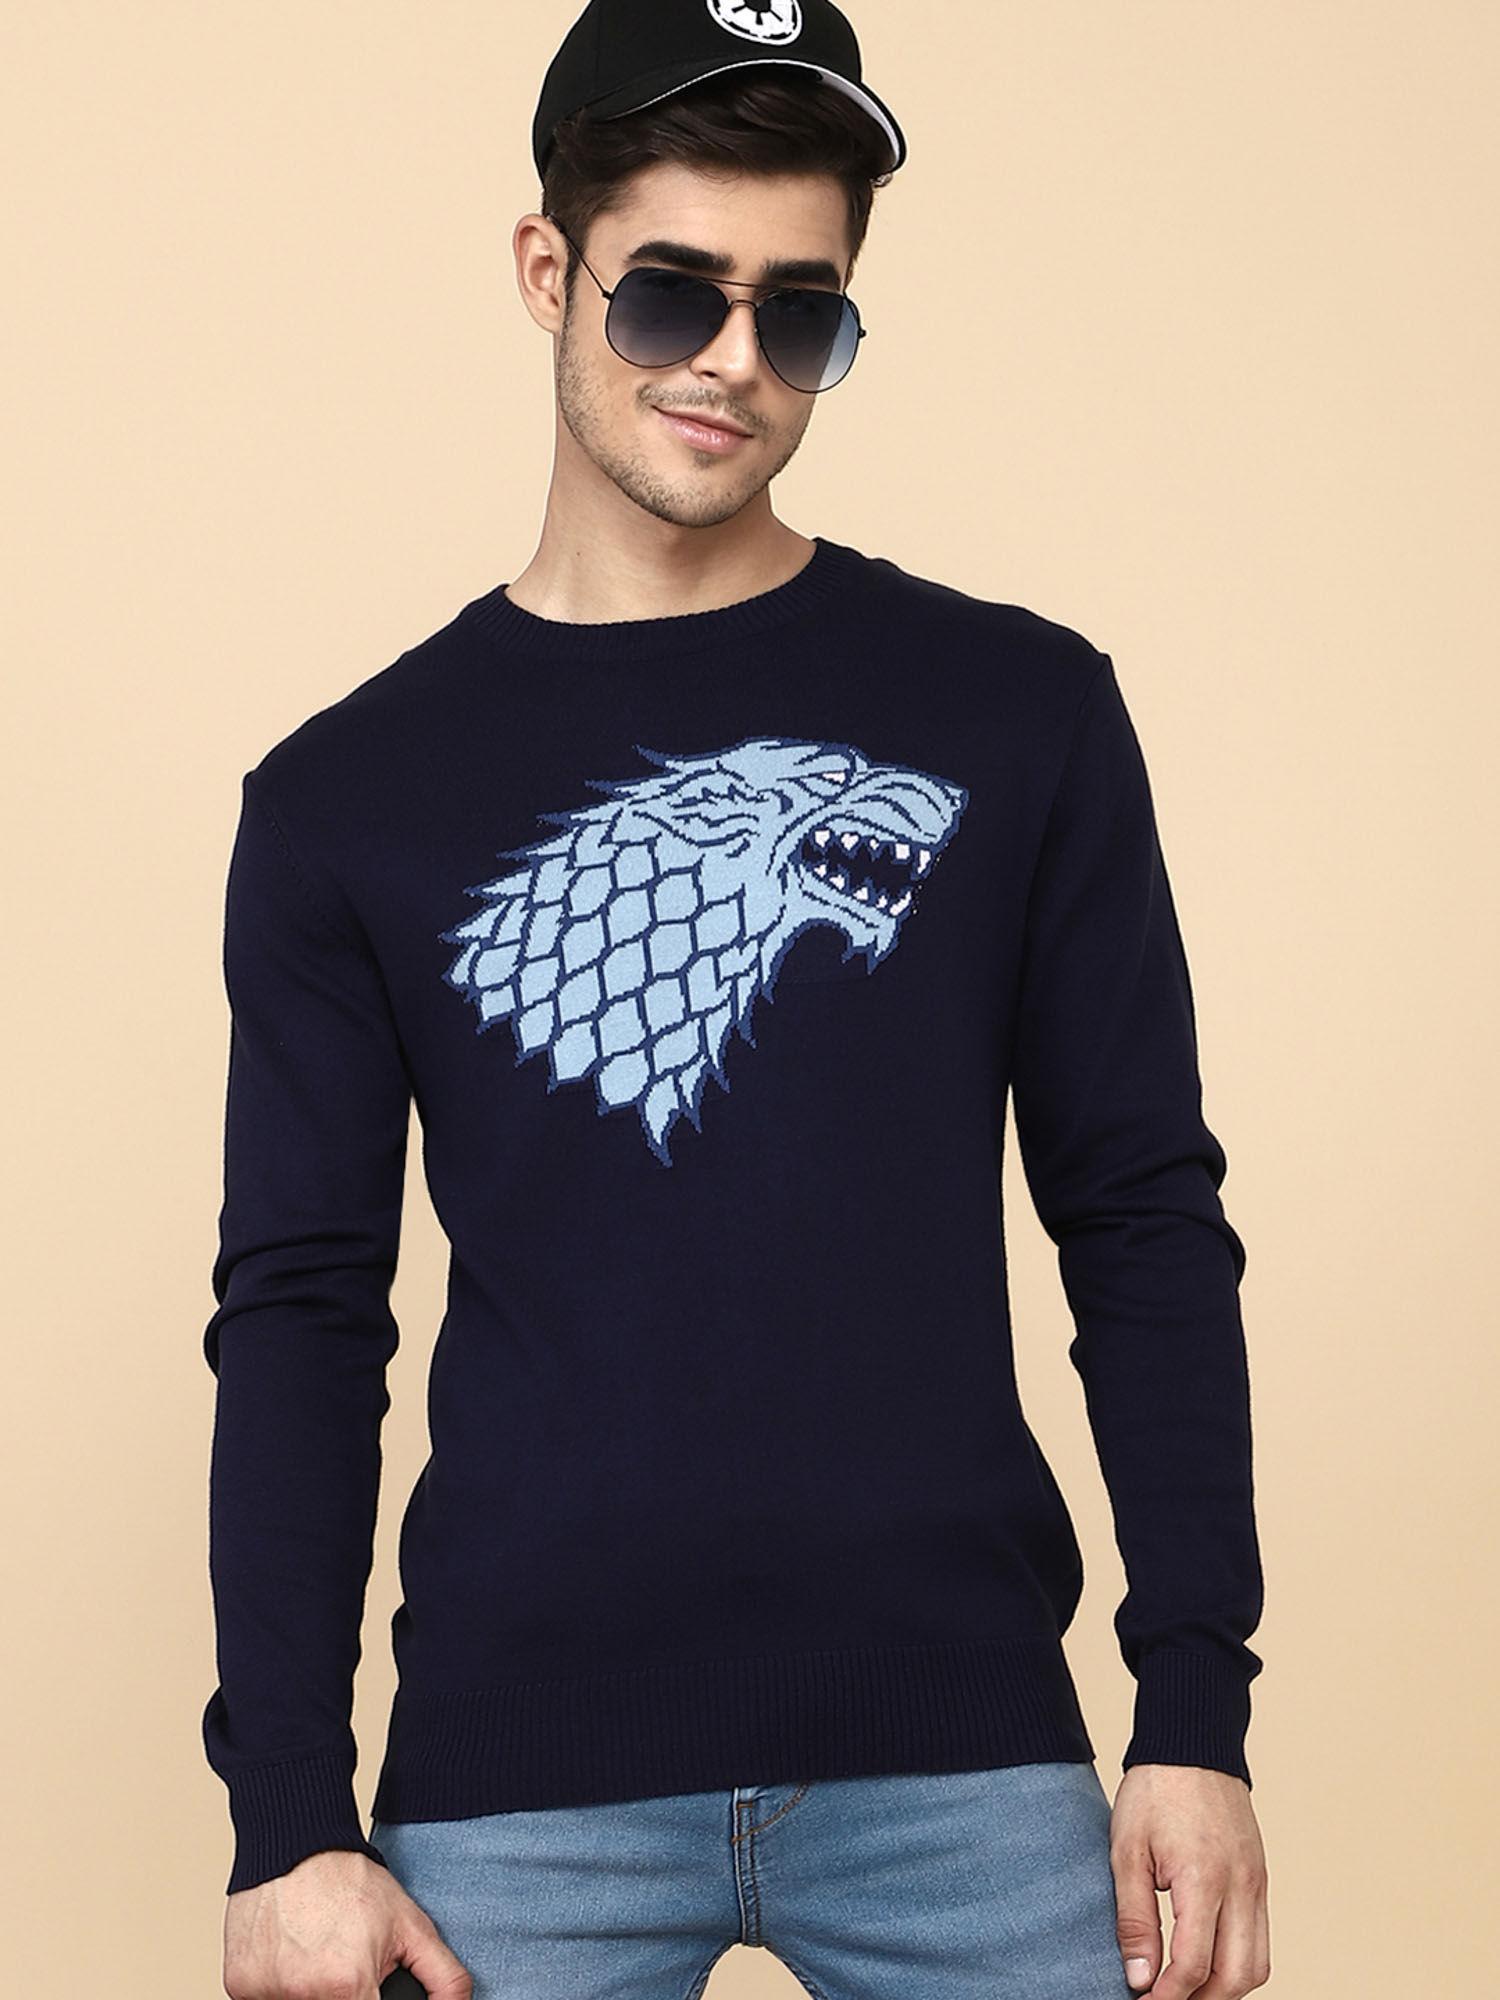 mens-game-of-thrones-printed-navy-blue-sweater